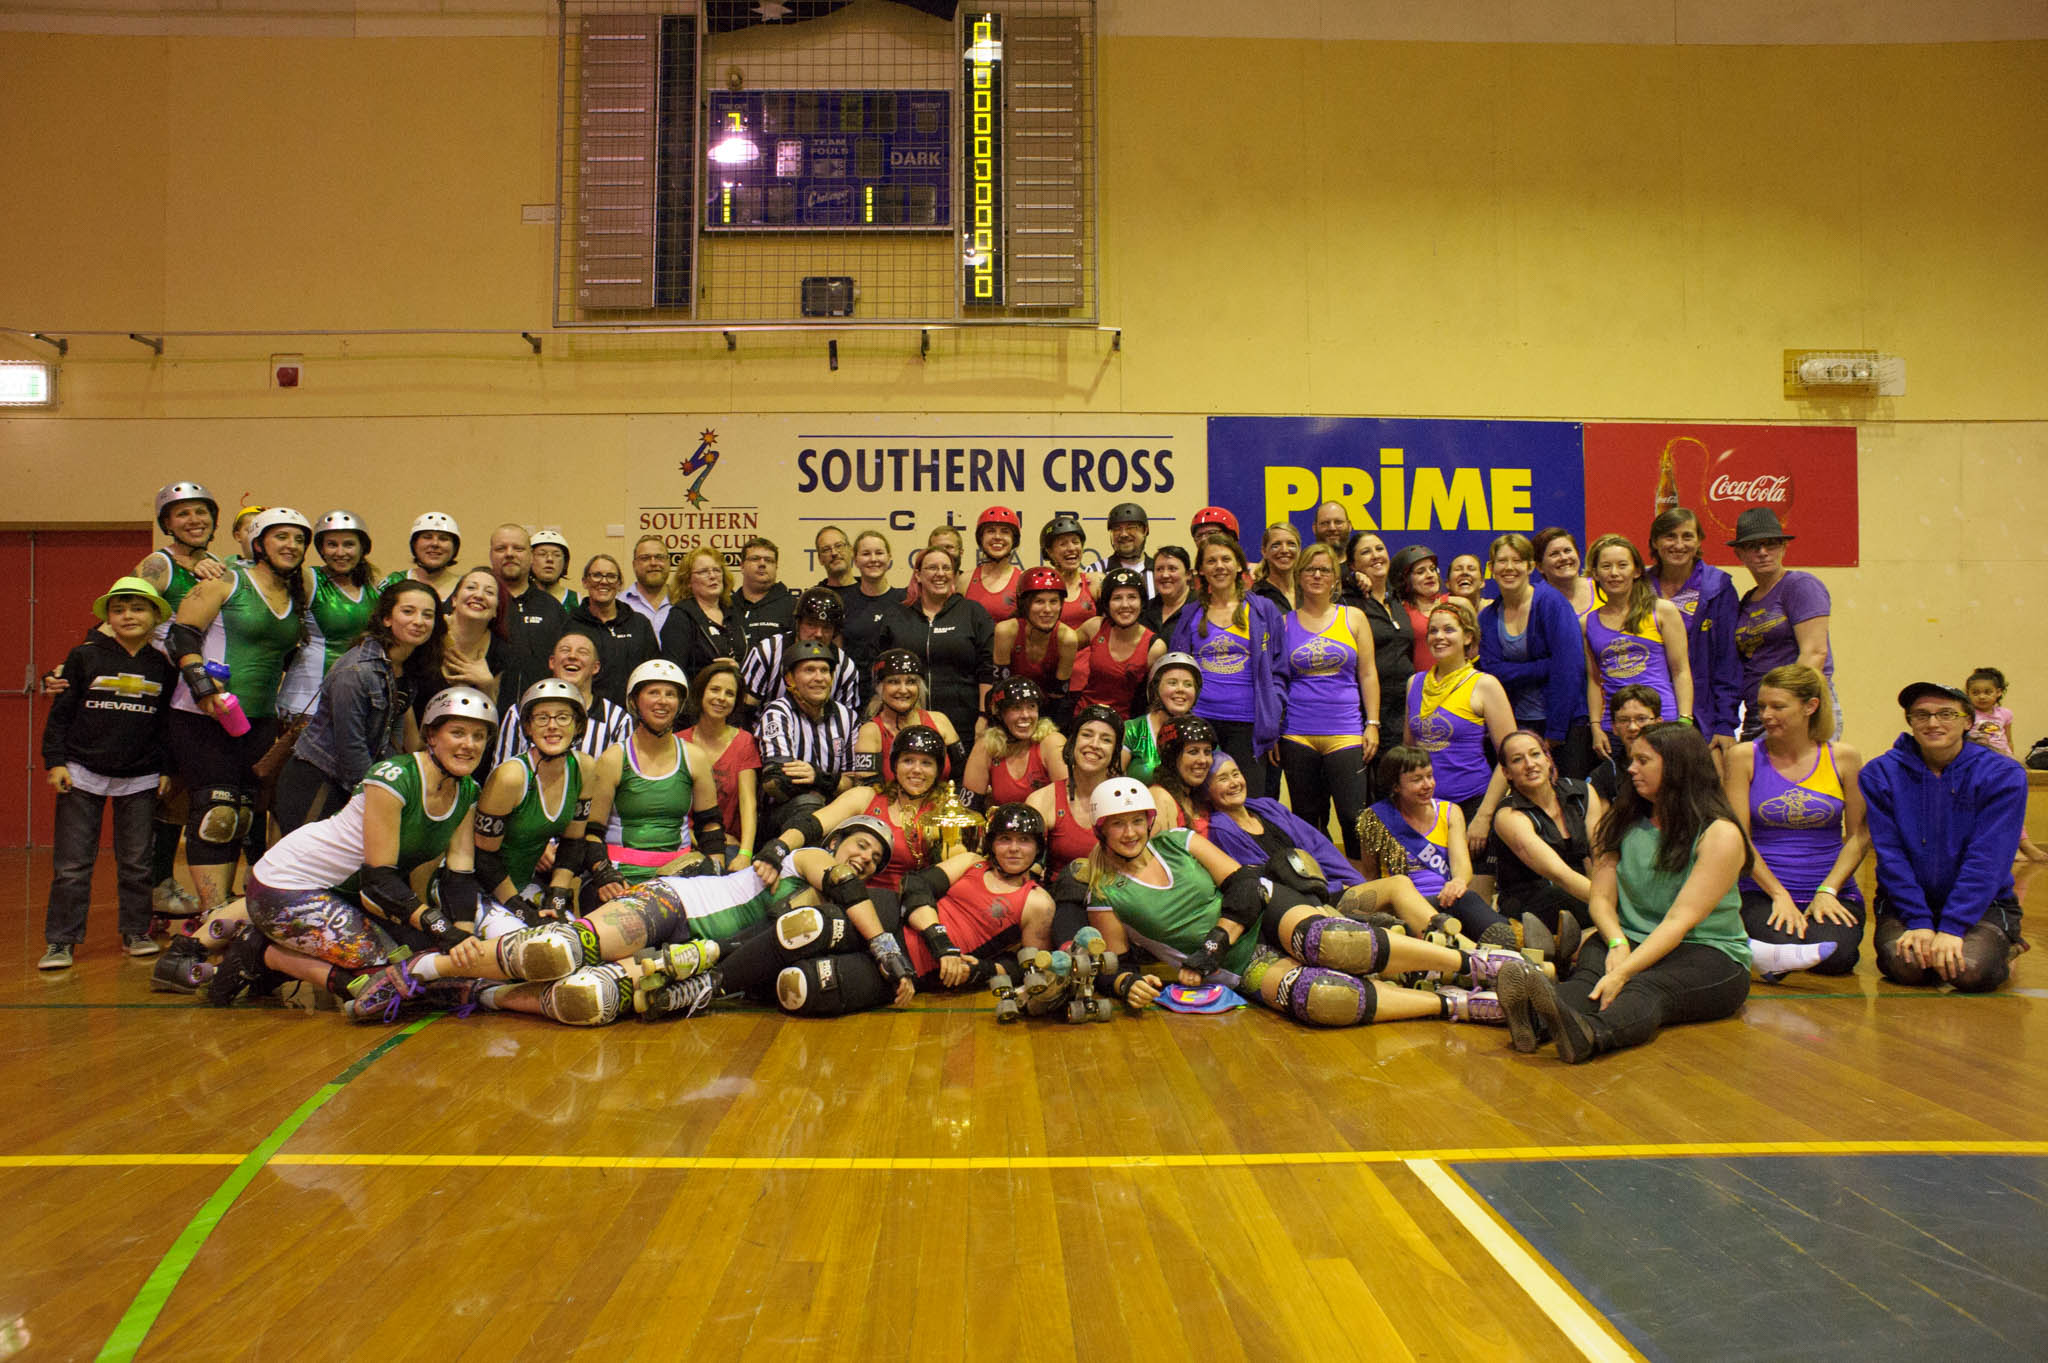 CRDL Grand Final 2015 - Block to the Future. Photographer: Brett Sargeant, D-eye Photography